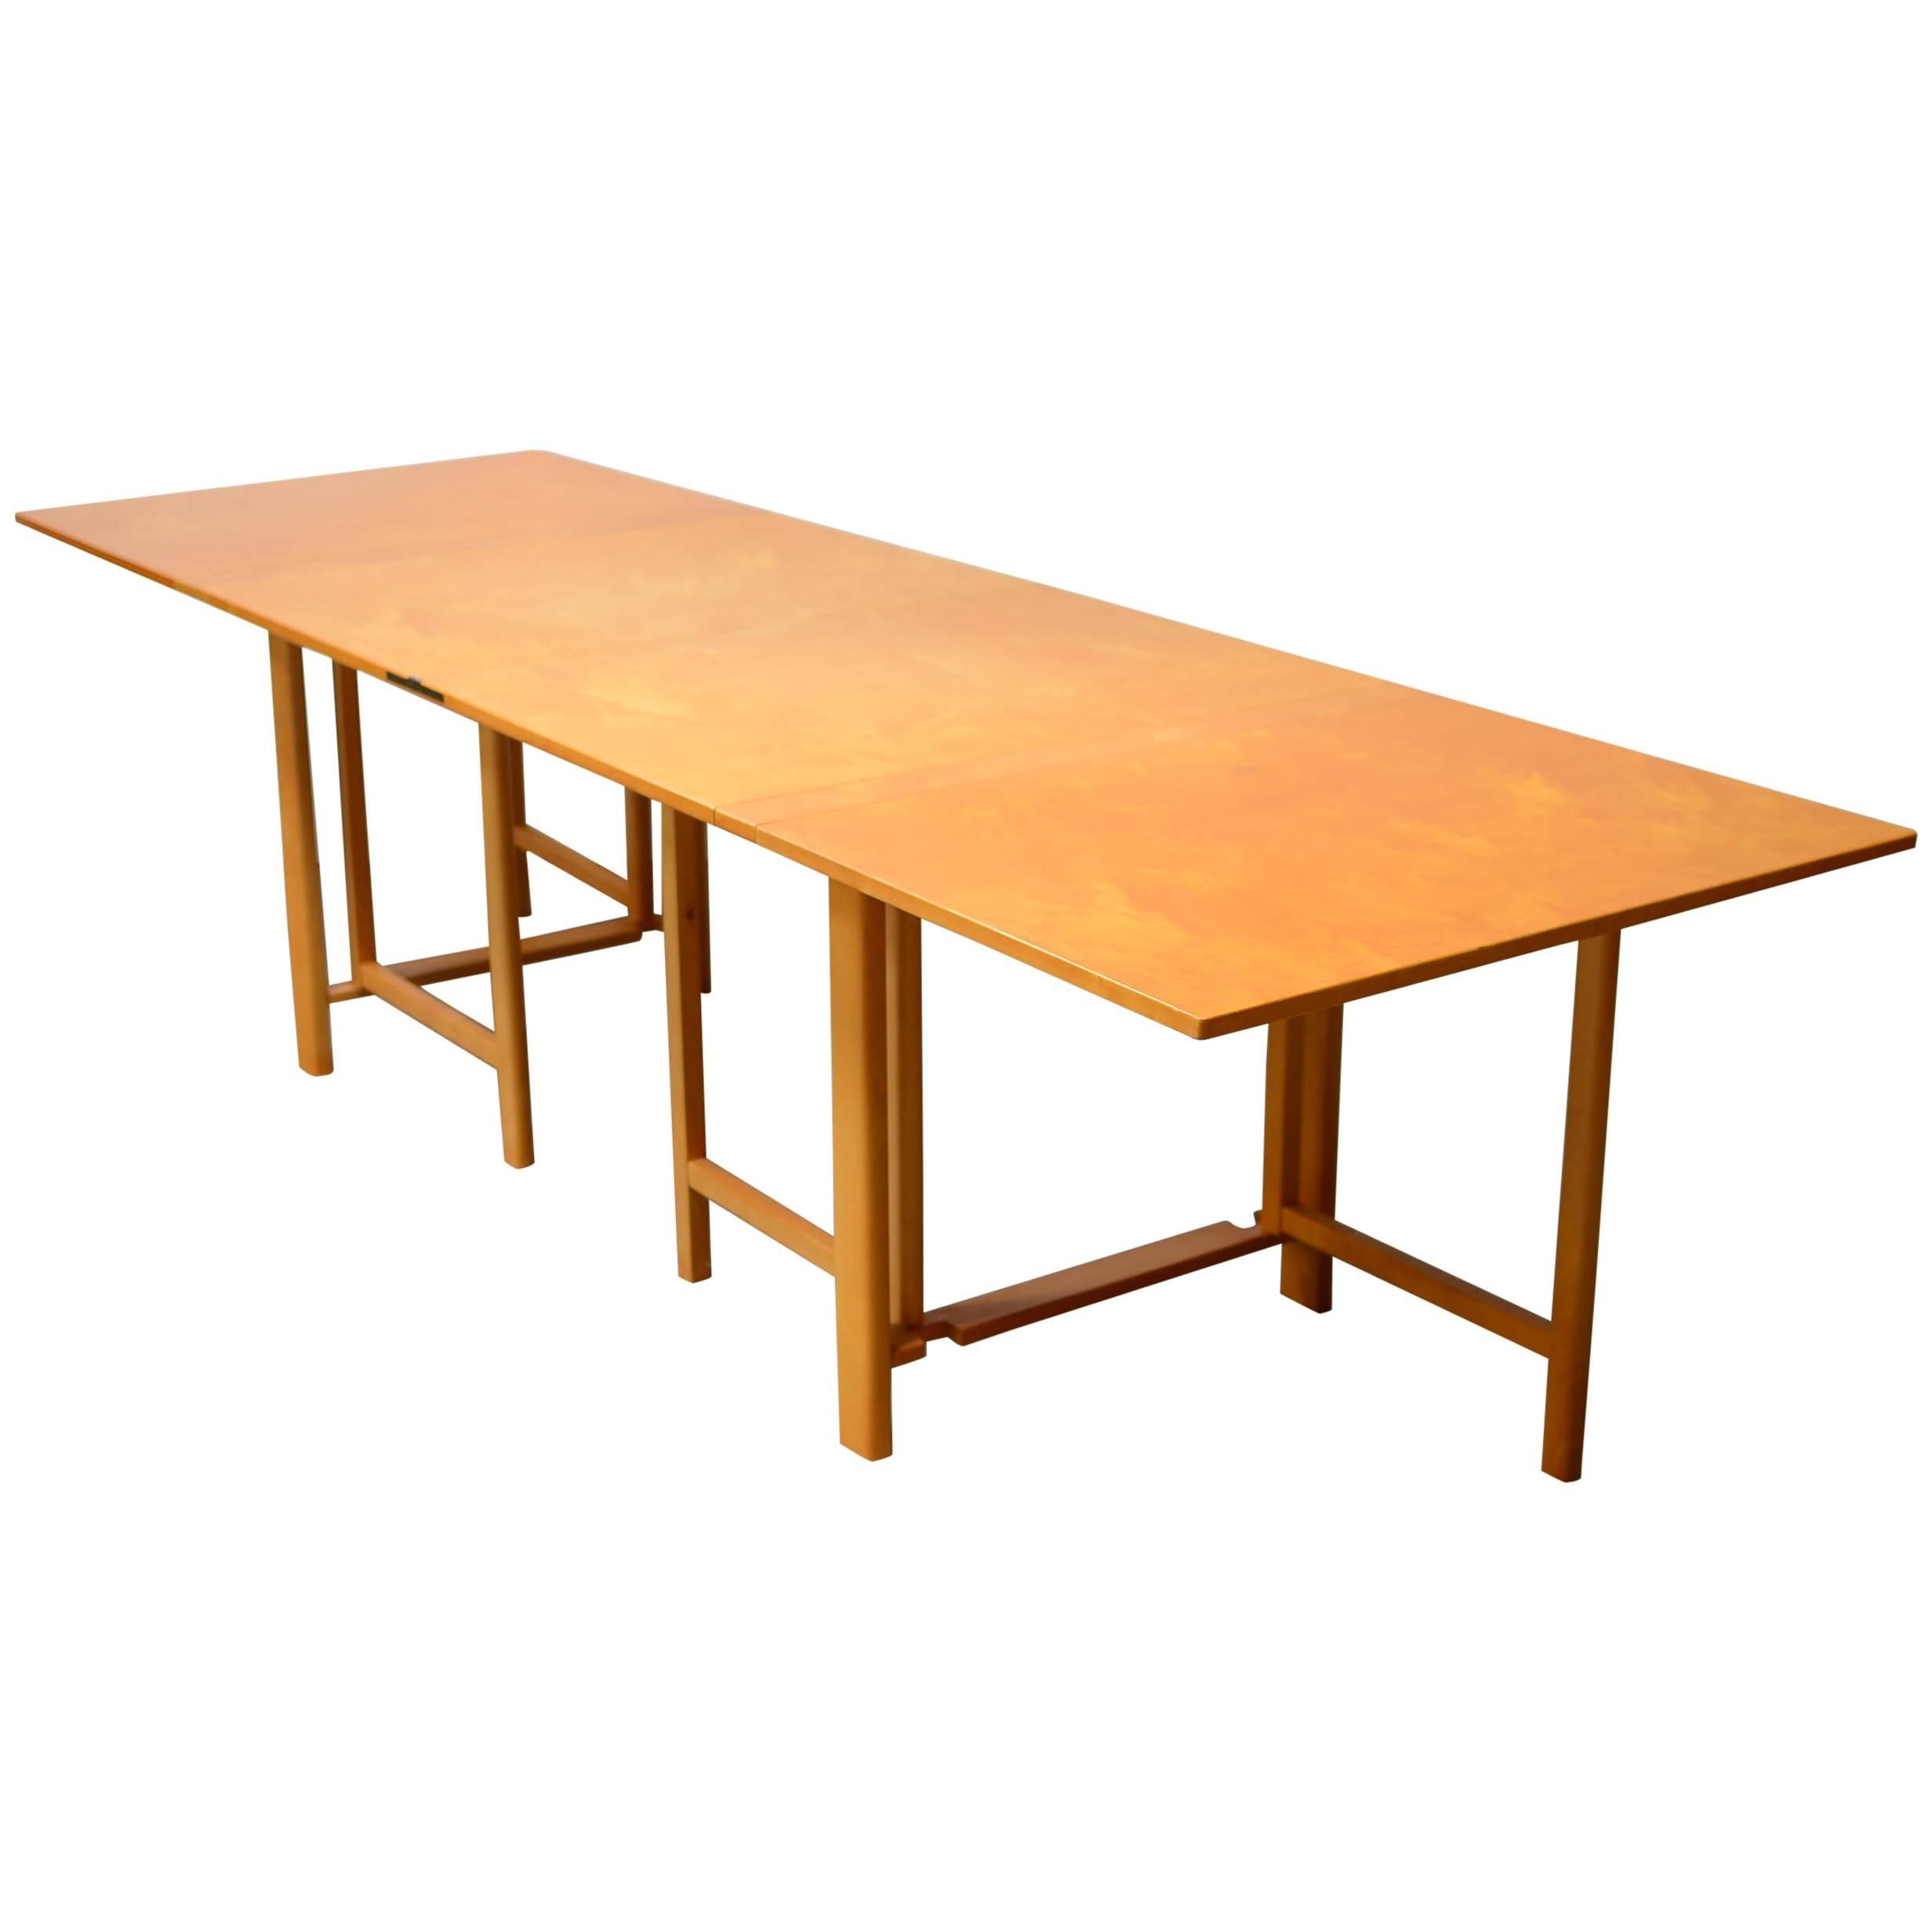 Bruno Mathsson "Maria" Dining Table, 1936 For Sale